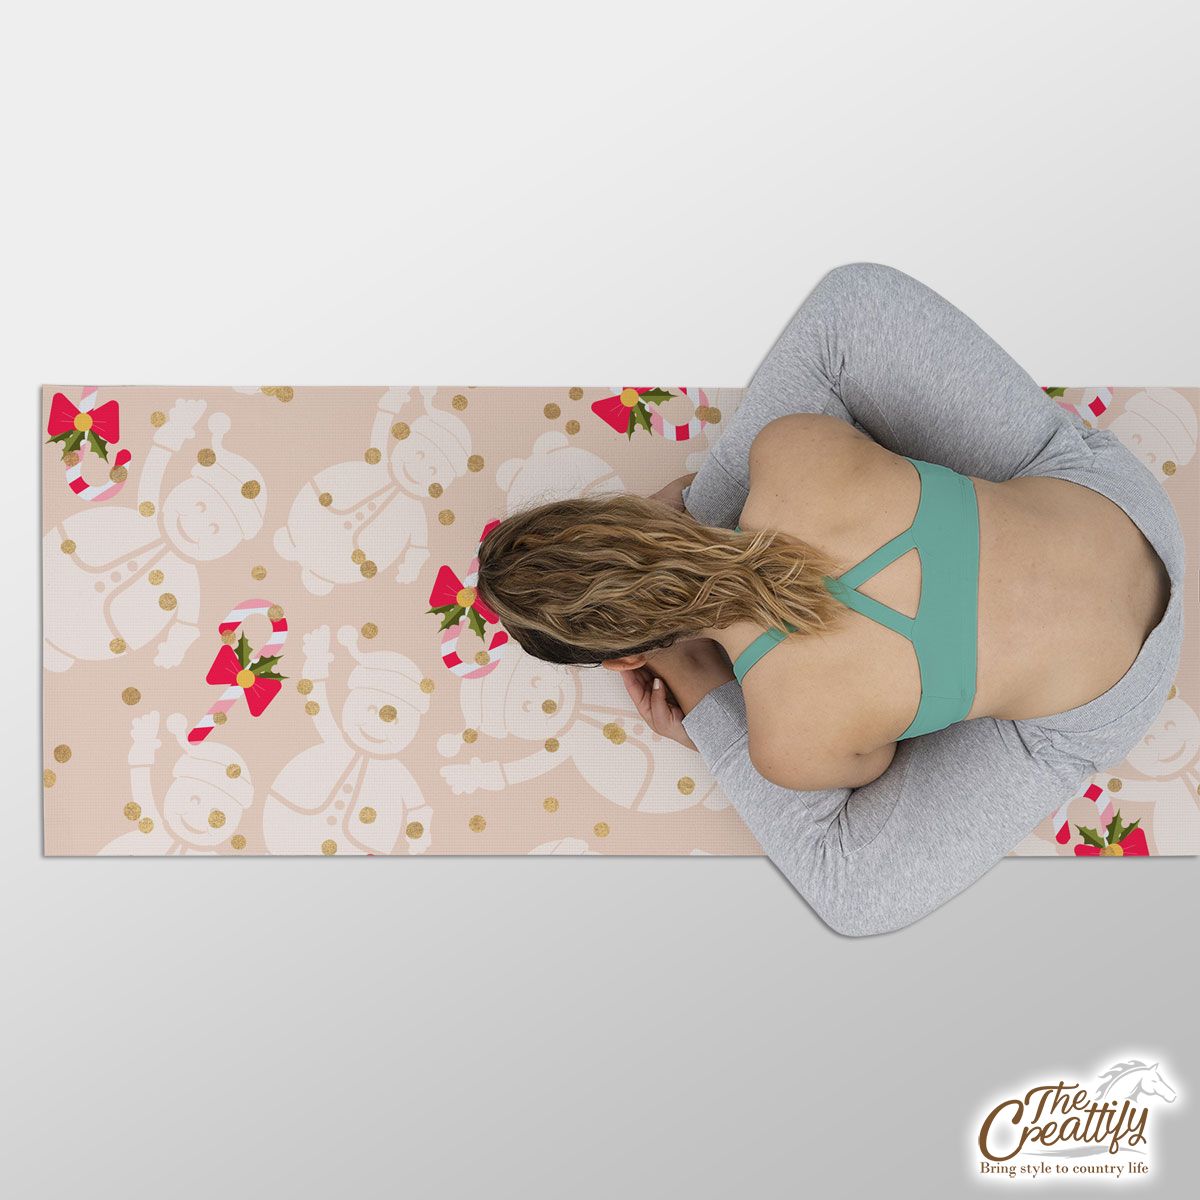 Snowman, Christmas Snowman With Candy Canes Yoga Mat